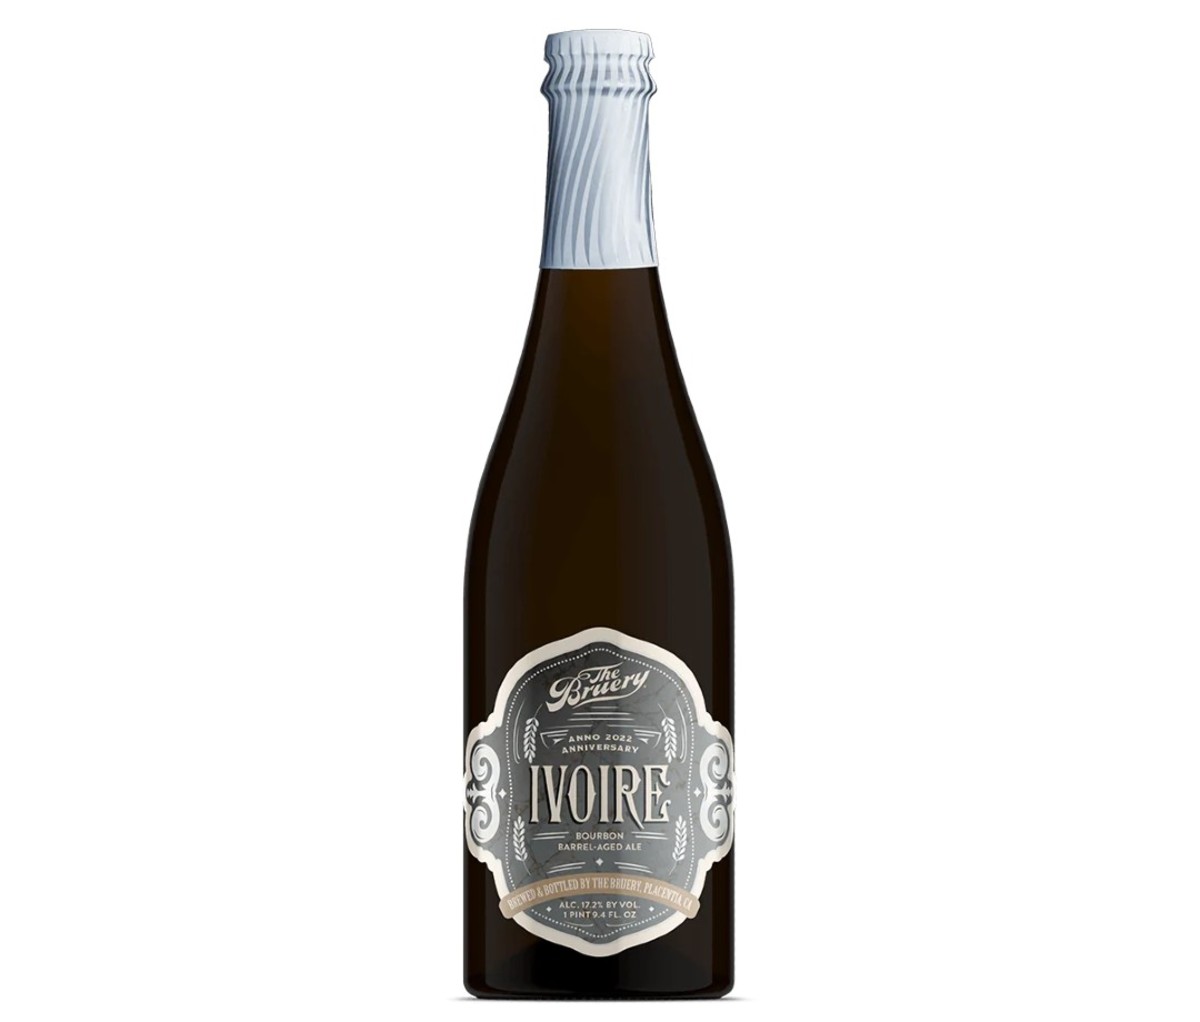 A bottle of The Bruery Ivoire